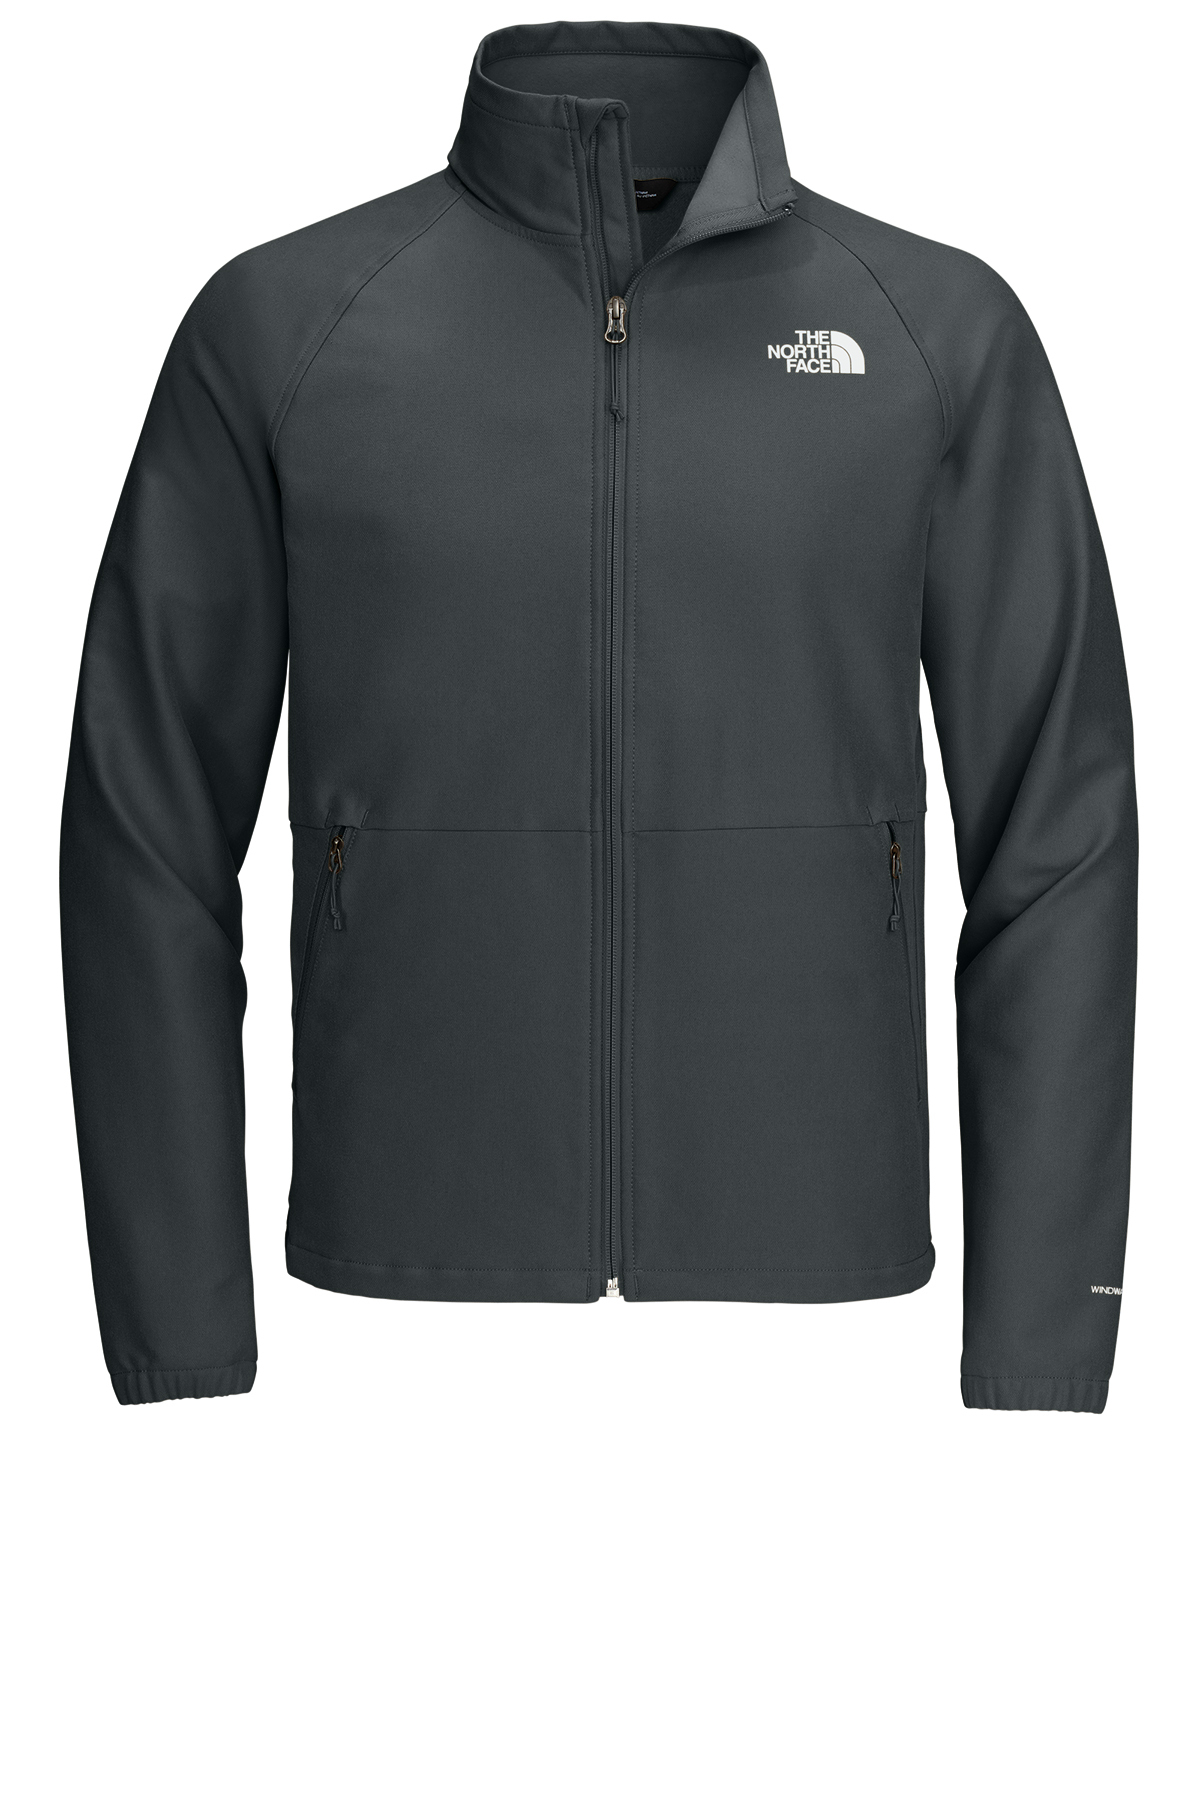 The North Face Barr Lake Soft Shell Jacket | Product ...